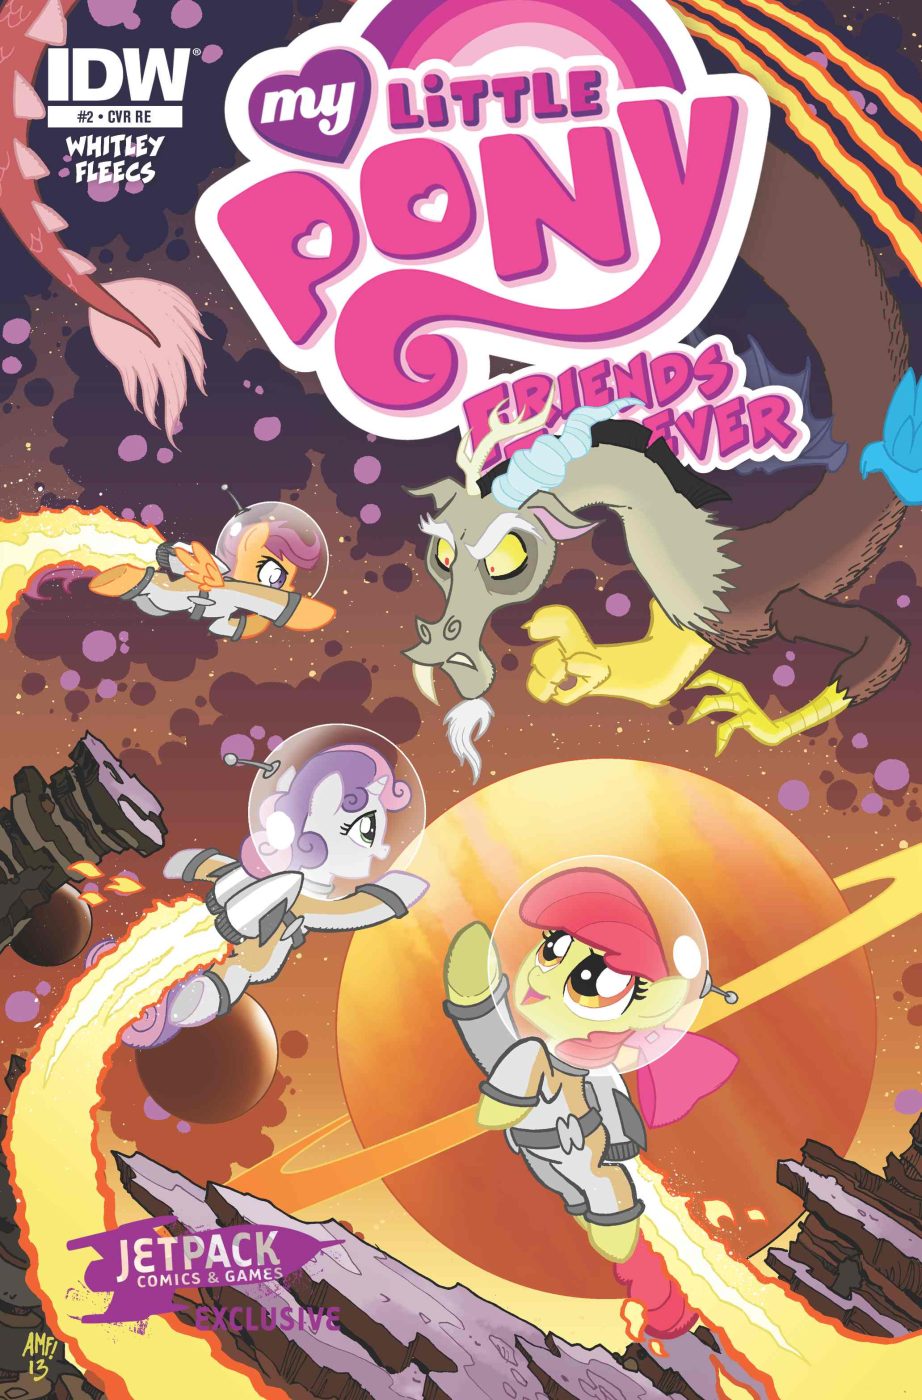 My Little Pony Friends Forever #2 (The Pony Jetpack Edition)